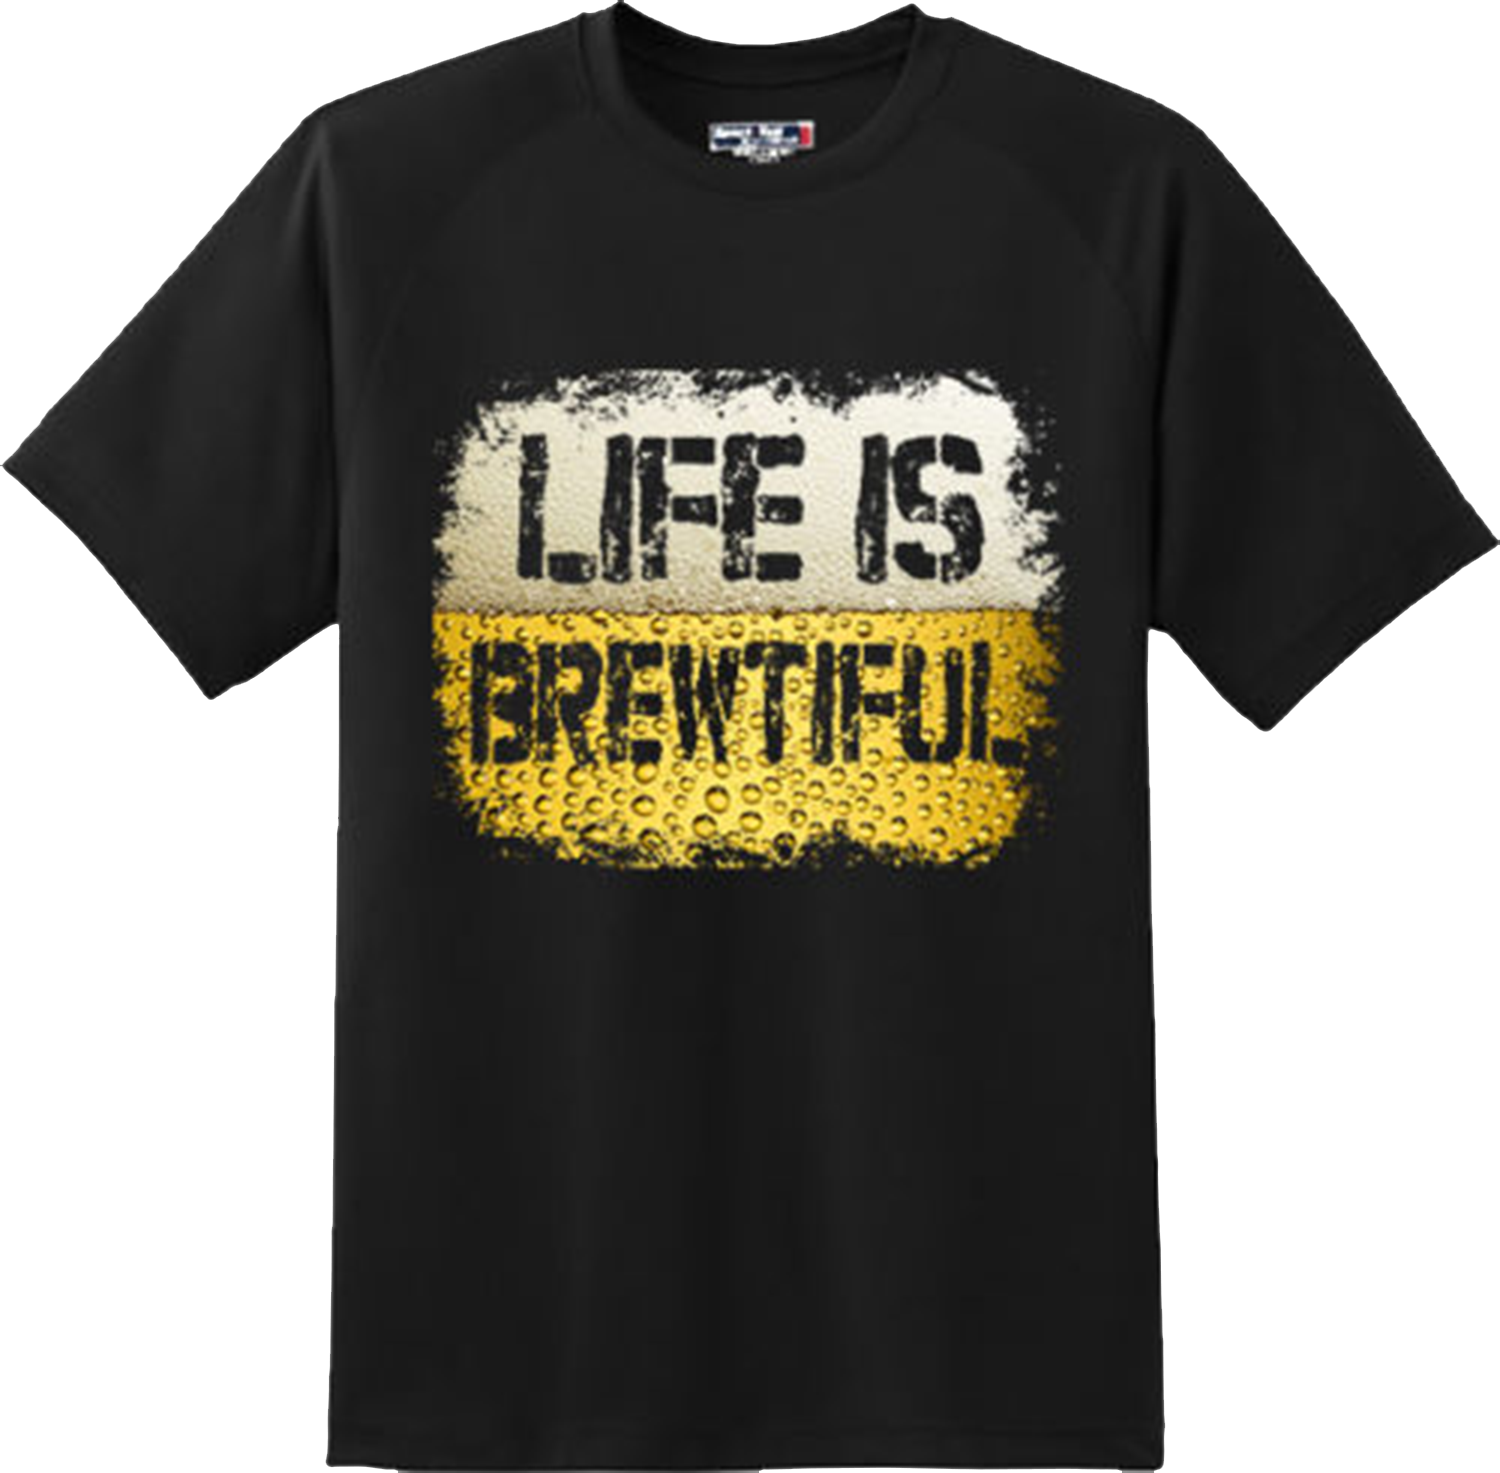 Funny Life Is Brewtiful beer Shot Humor Party Bar T Shirt New Graphic Tee